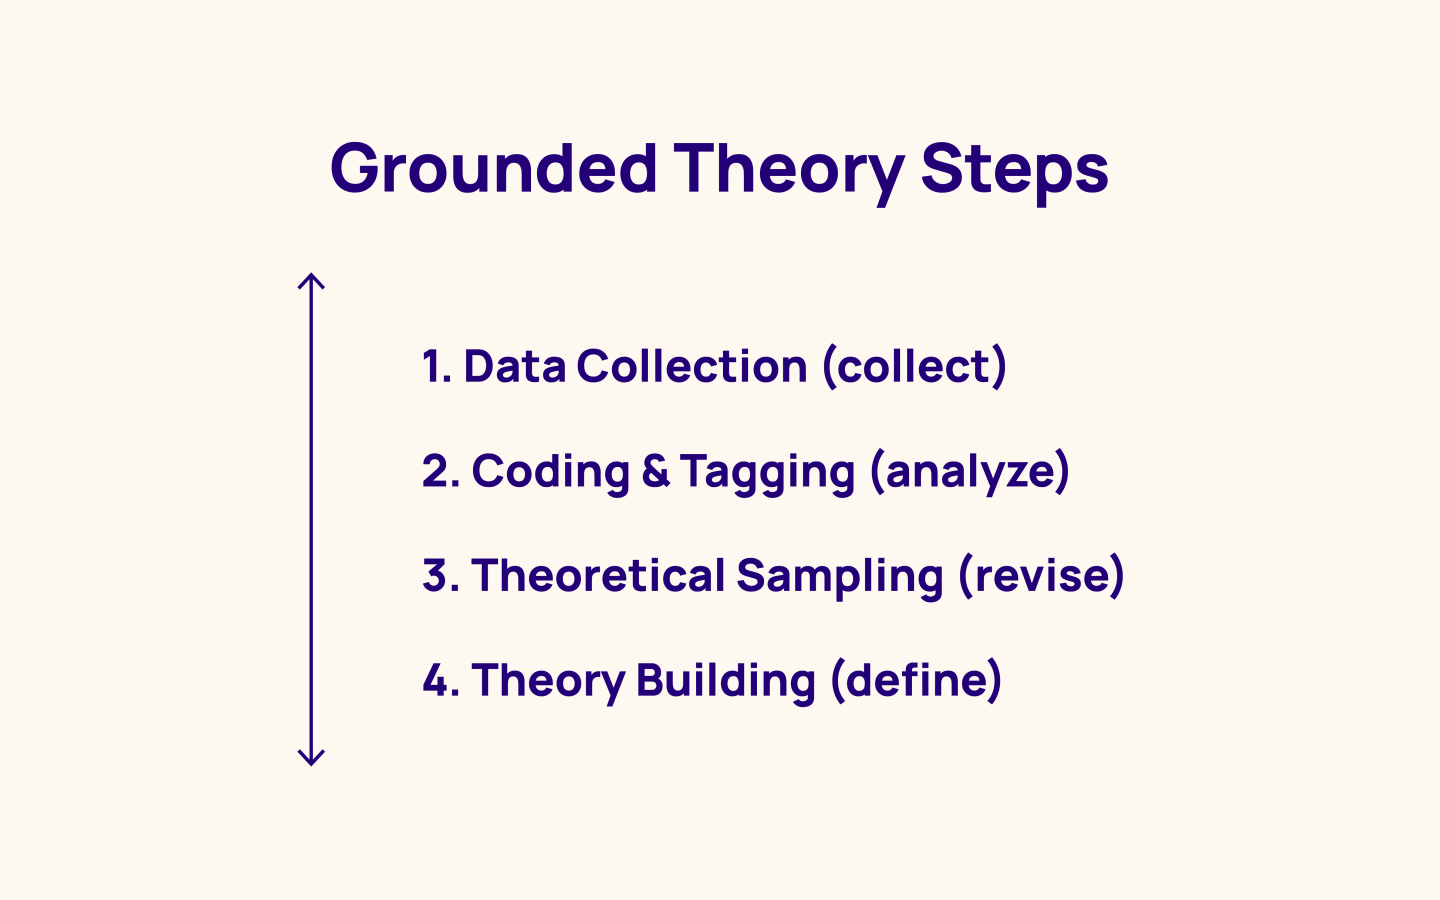 The steps to take when using grounded theory in your qualitative research project. 